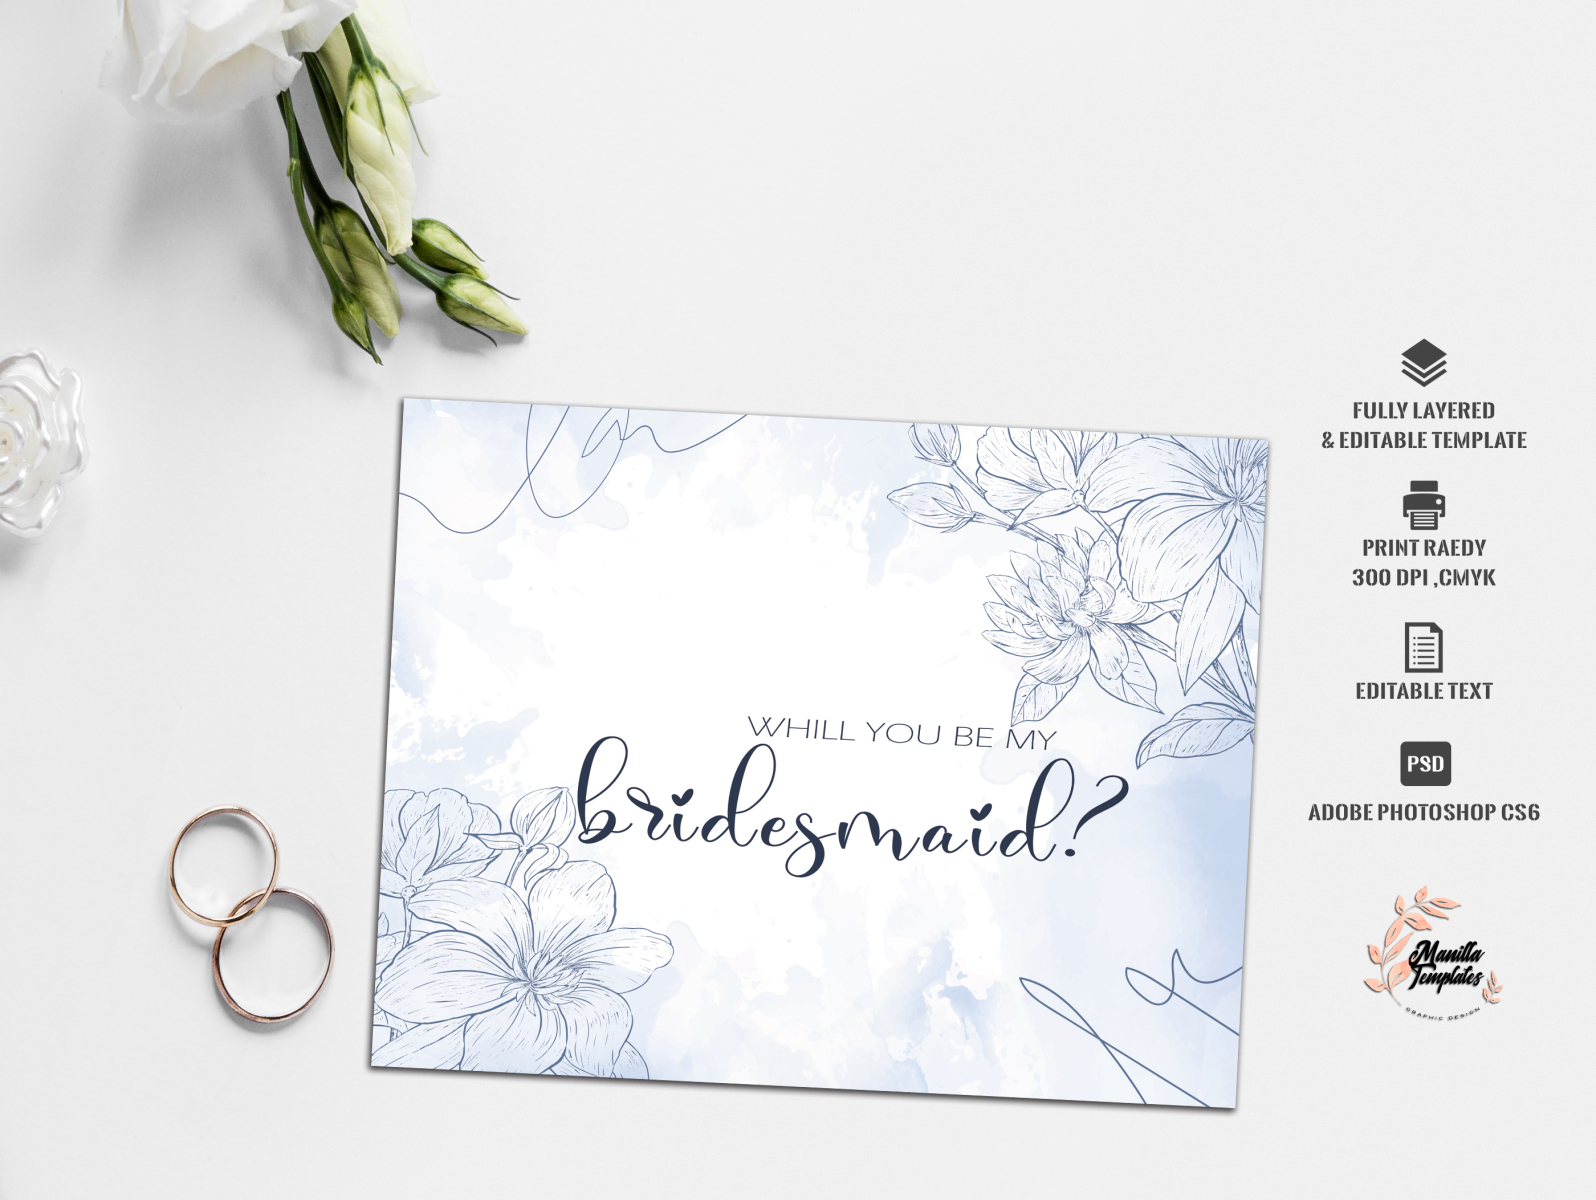 bridesmaid-proposal-card-template-by-manel-mebaouj-on-dribbble